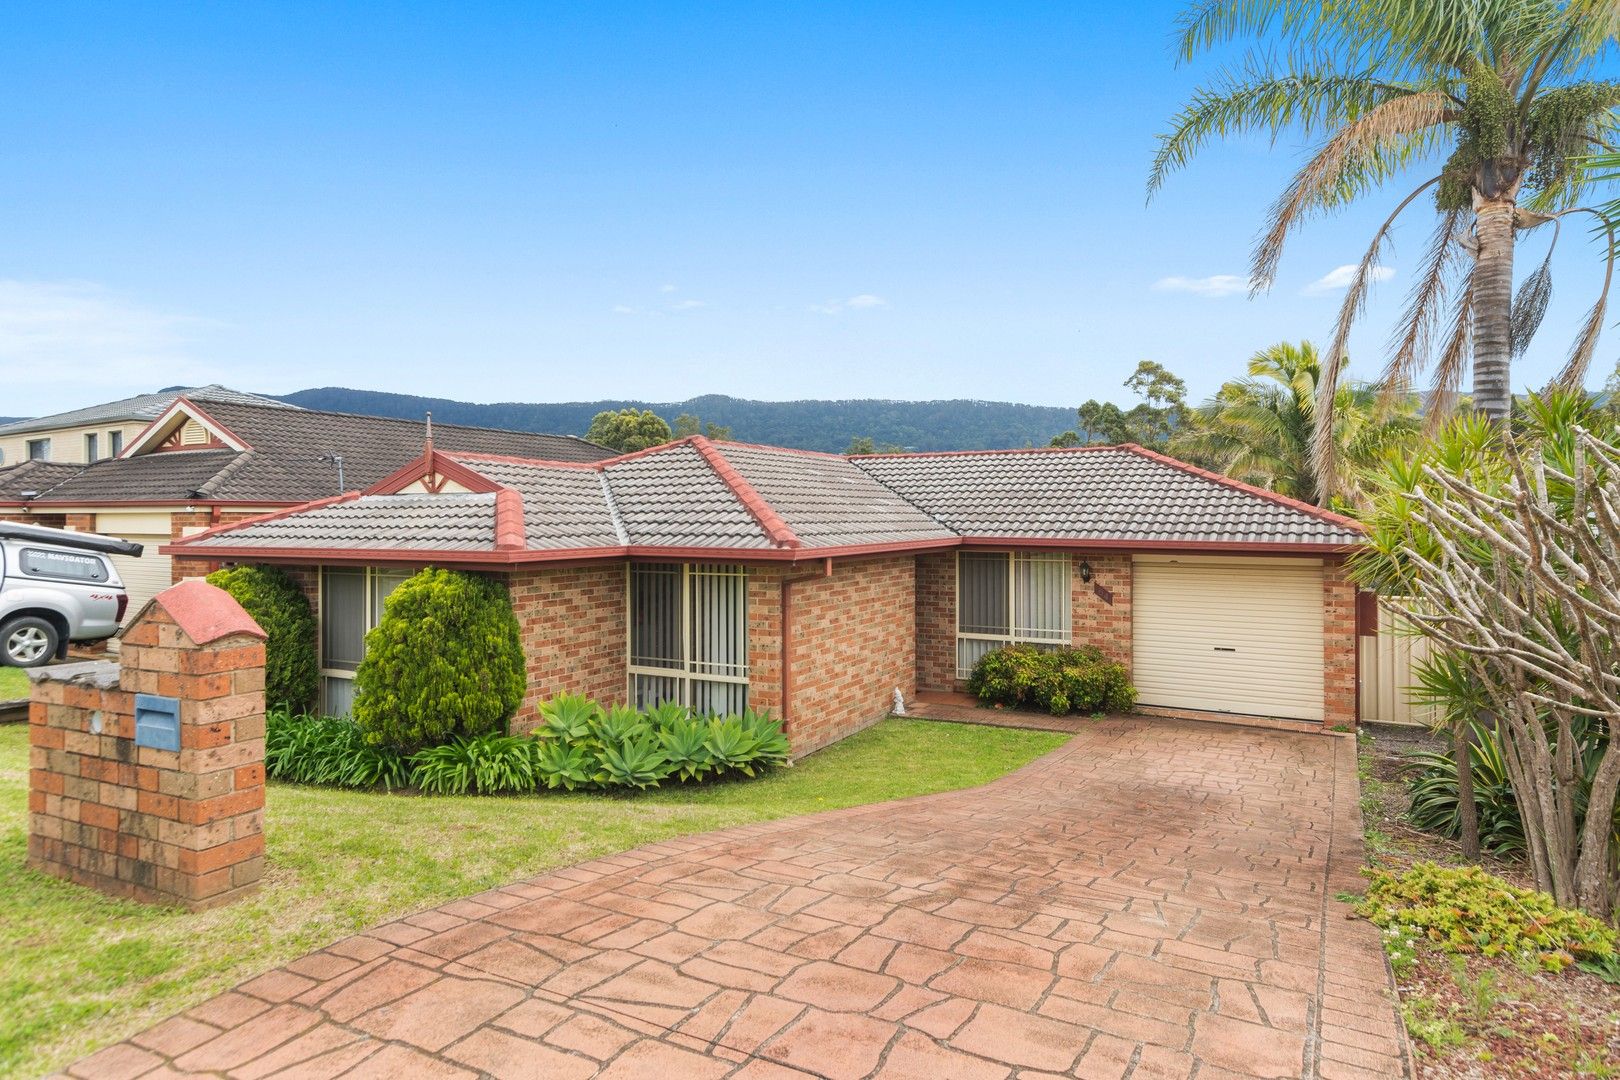 3 bedrooms House in 64 Robins Creek Drive HORSLEY NSW, 2530